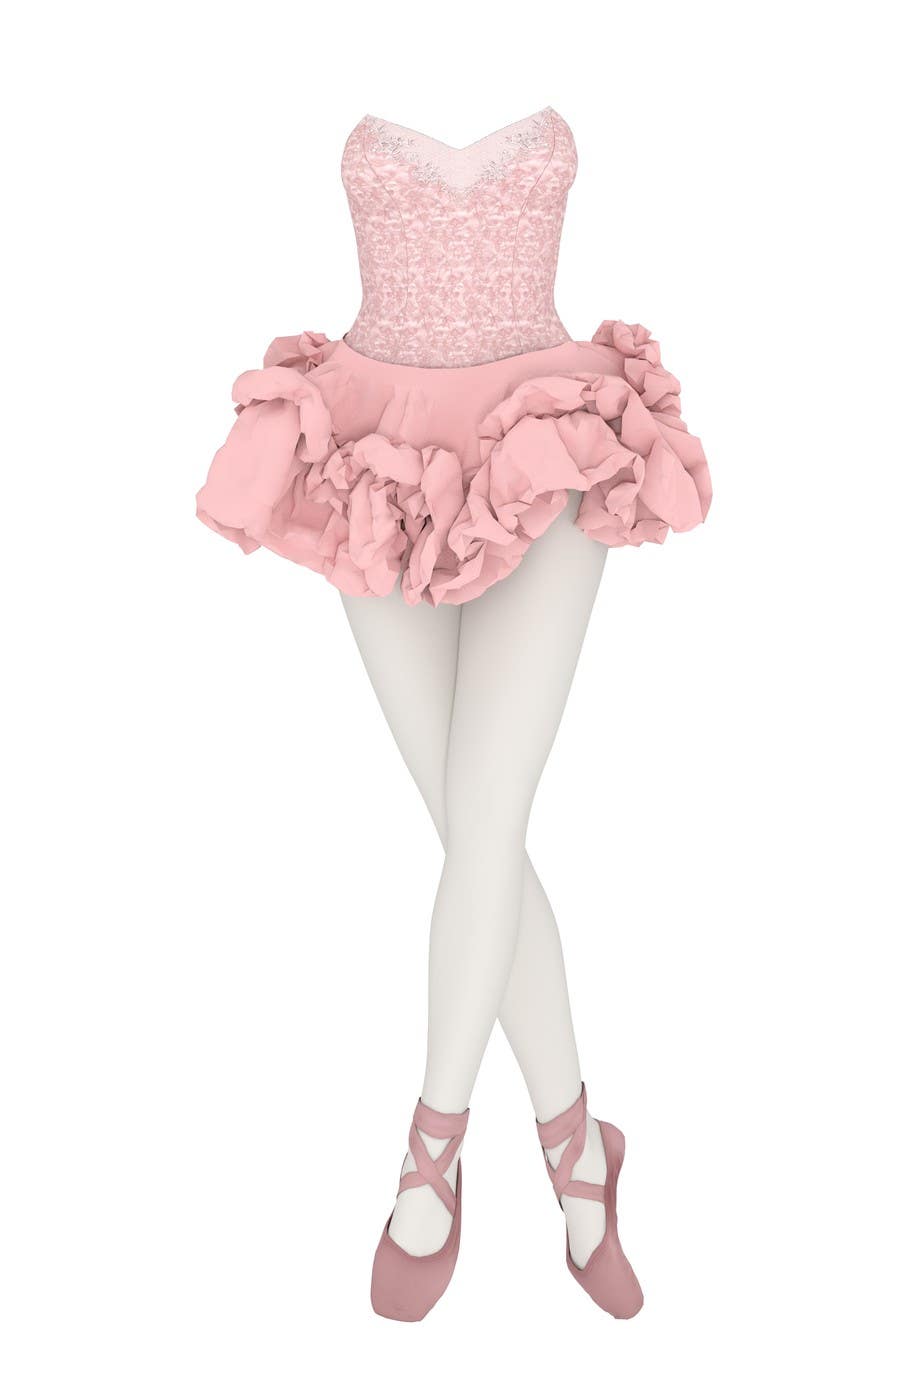 
                                                                                                                        Konkurrenceindlæg #                                            5
                                         for                                             Illustrate a realistic ballet dancer costume and legs for printing
                                        